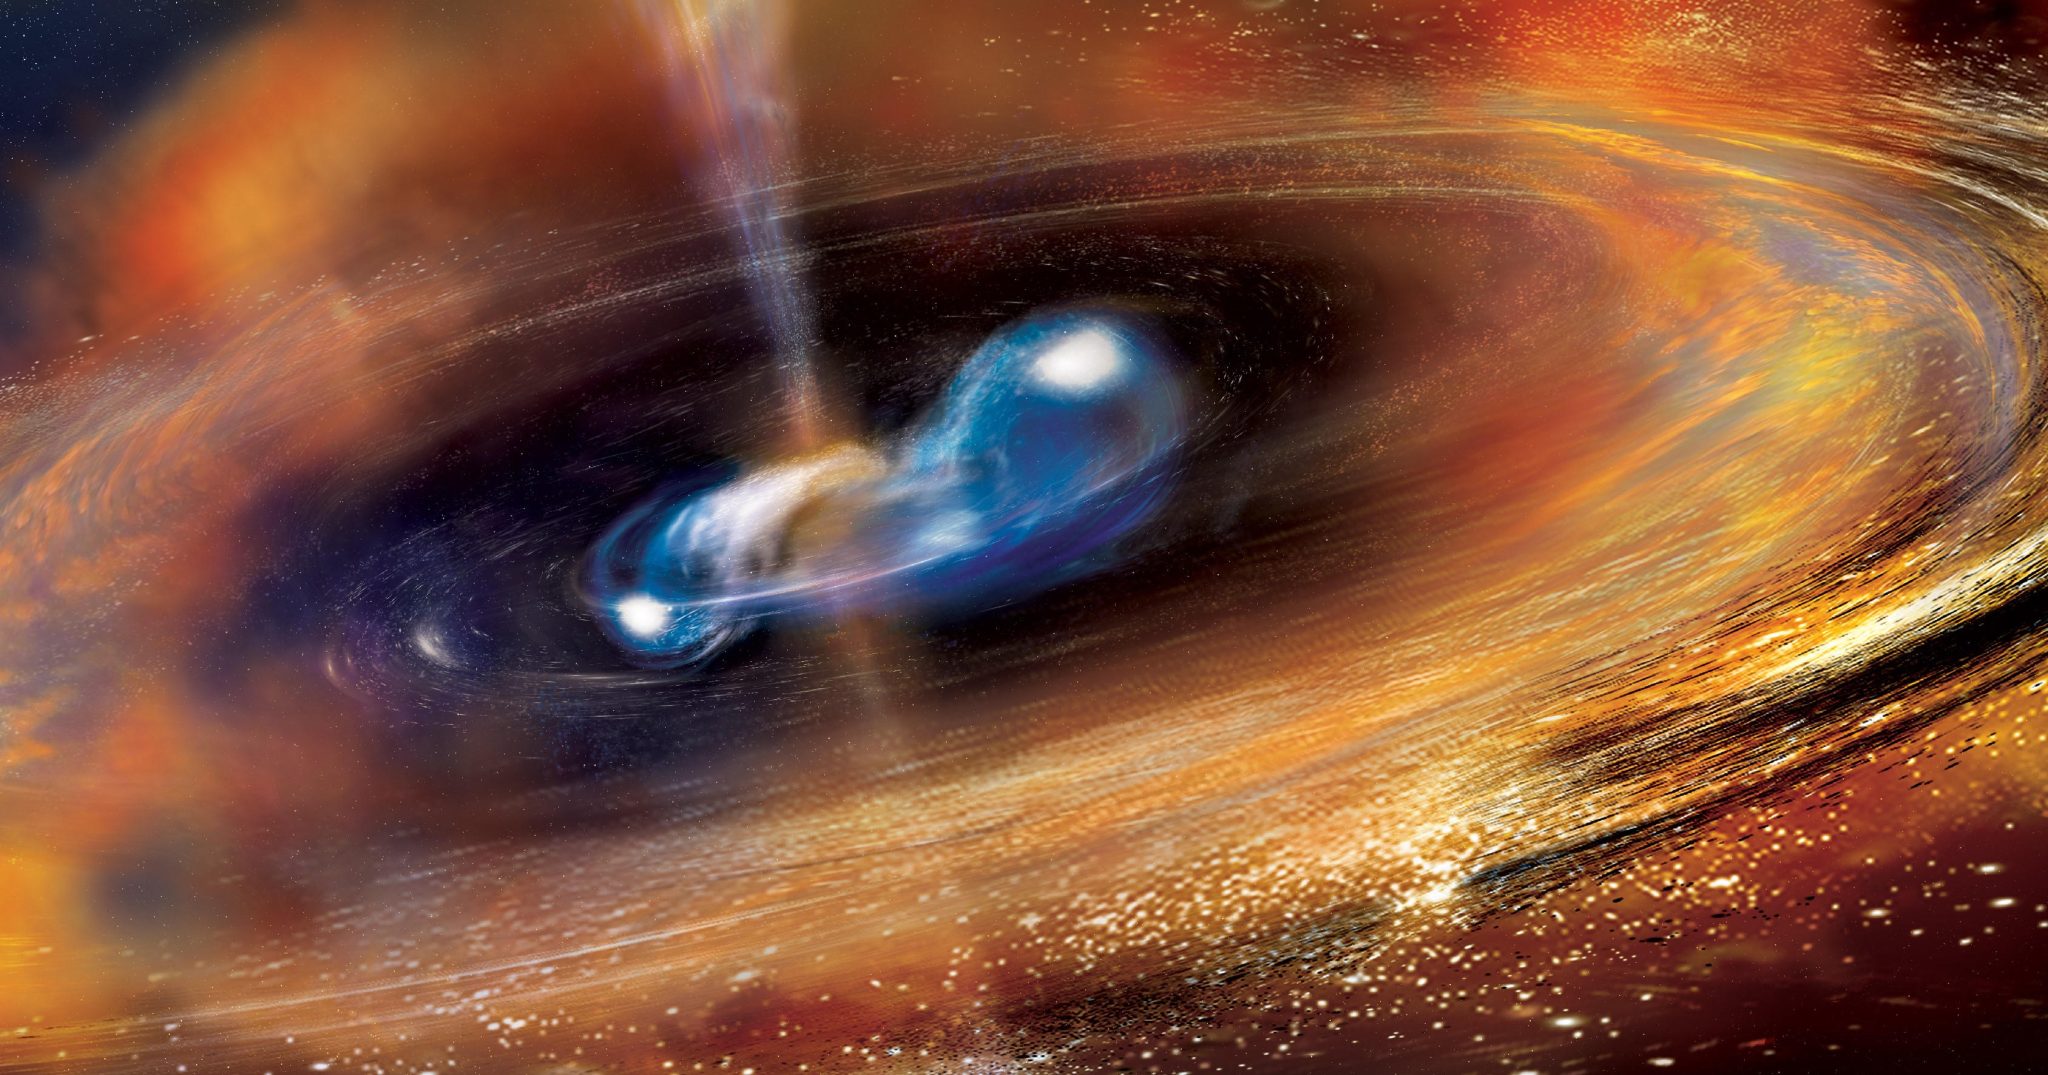 Artist's conception of a gamma ray burst